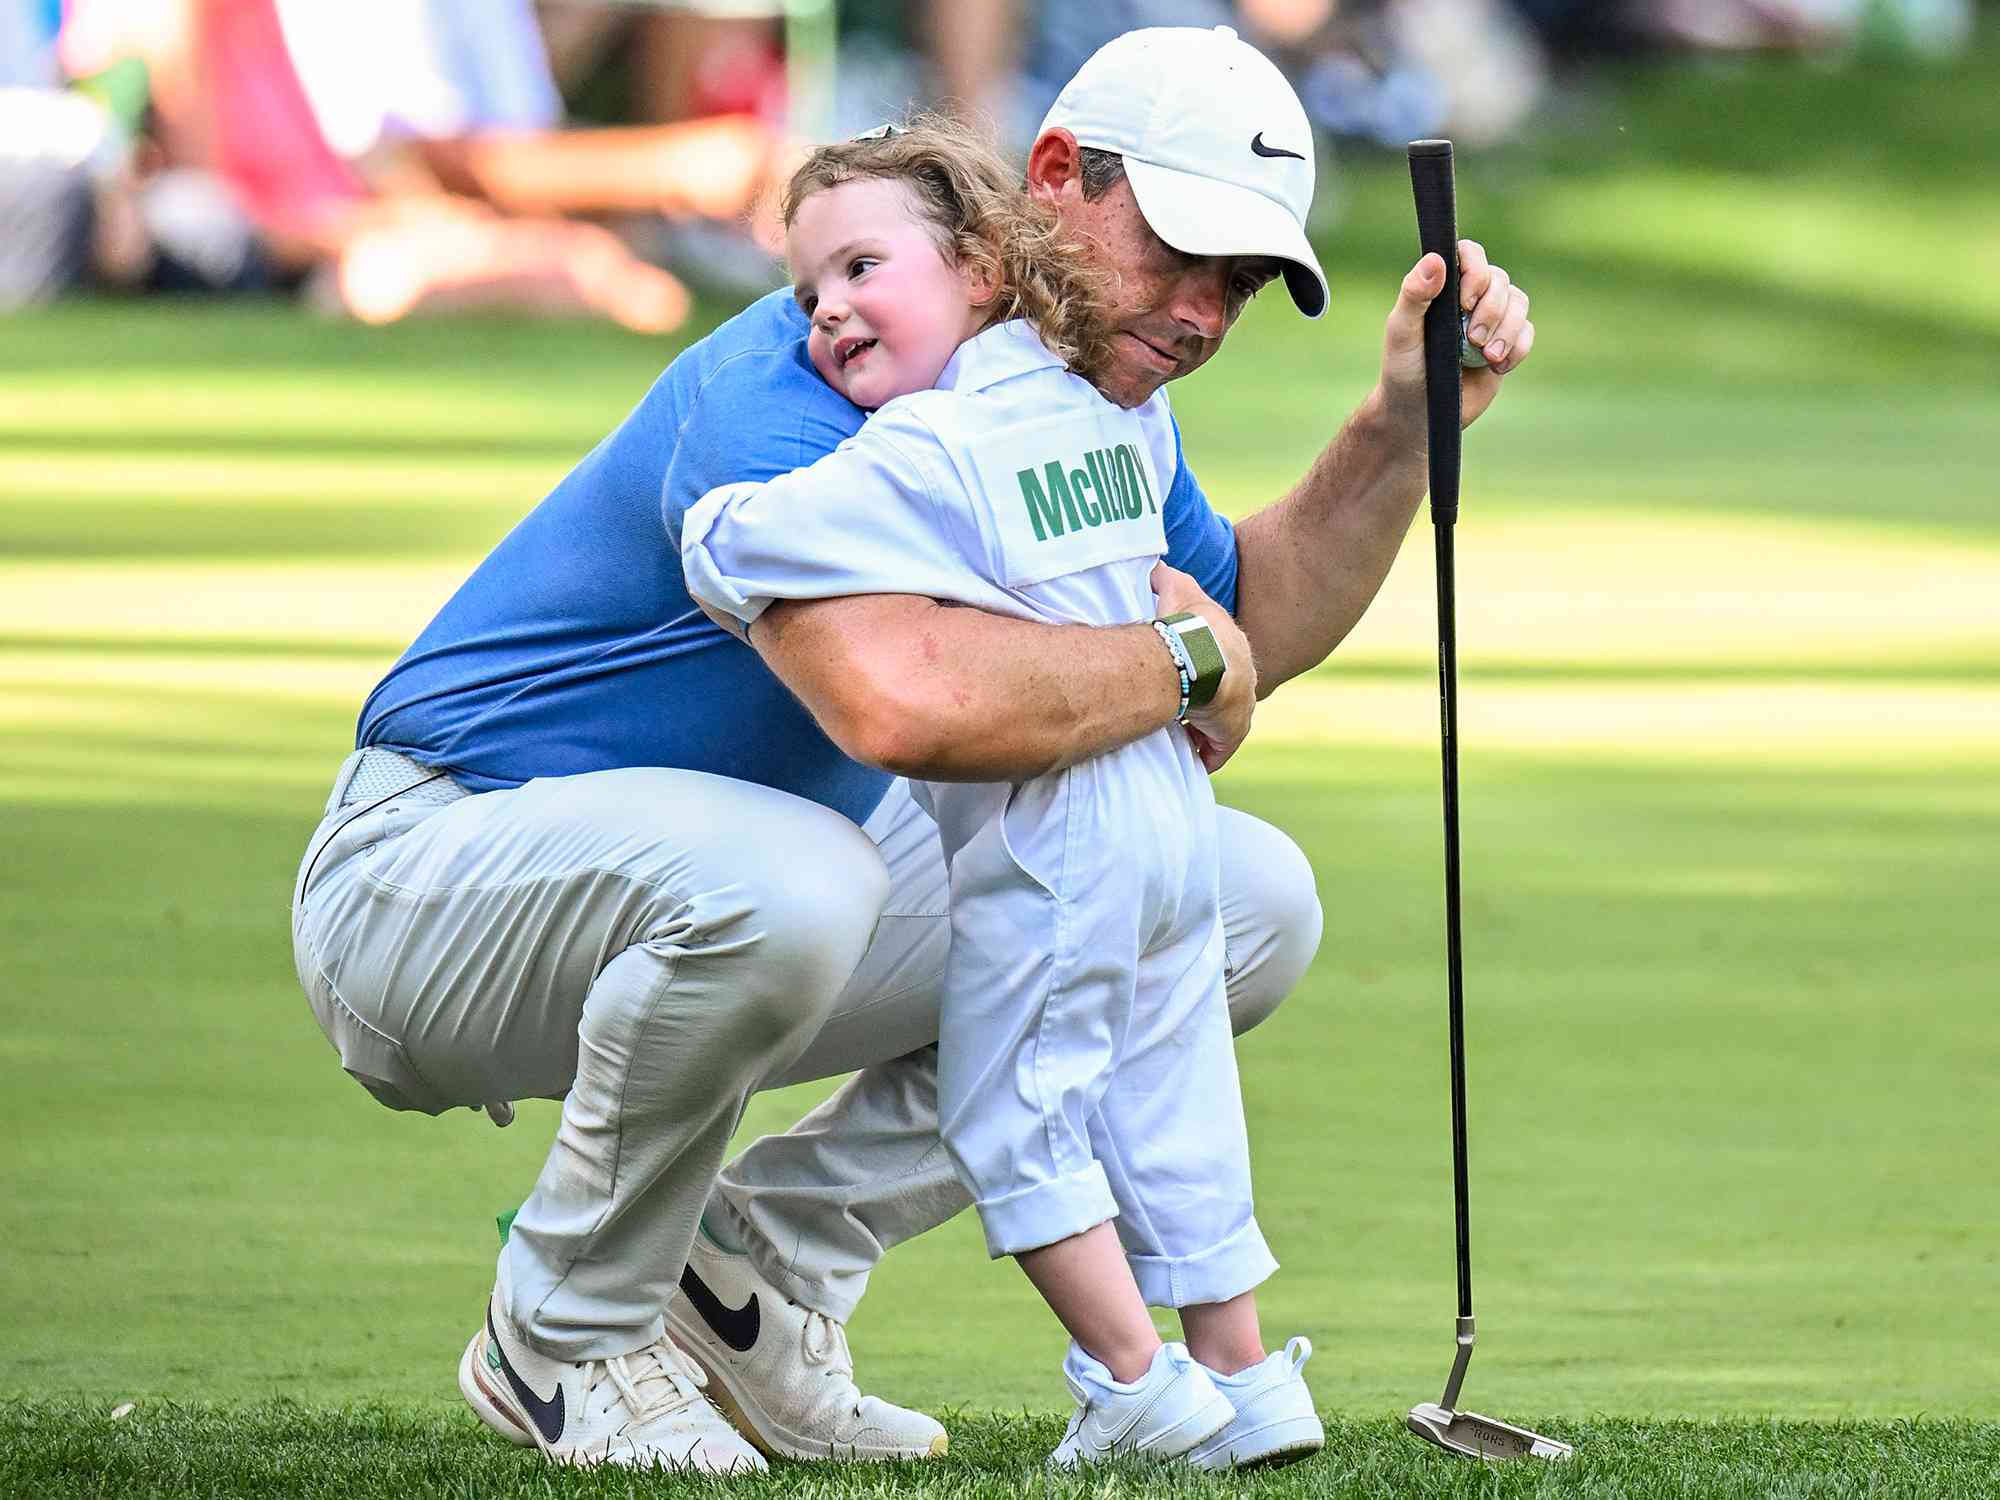 Rory McIlroy of Northern Ireland hugs his daughter Poppy on the ninth hole during the Par 3 Contest prior to the 2023 Masters Tournament at Augusta National Golf Club 